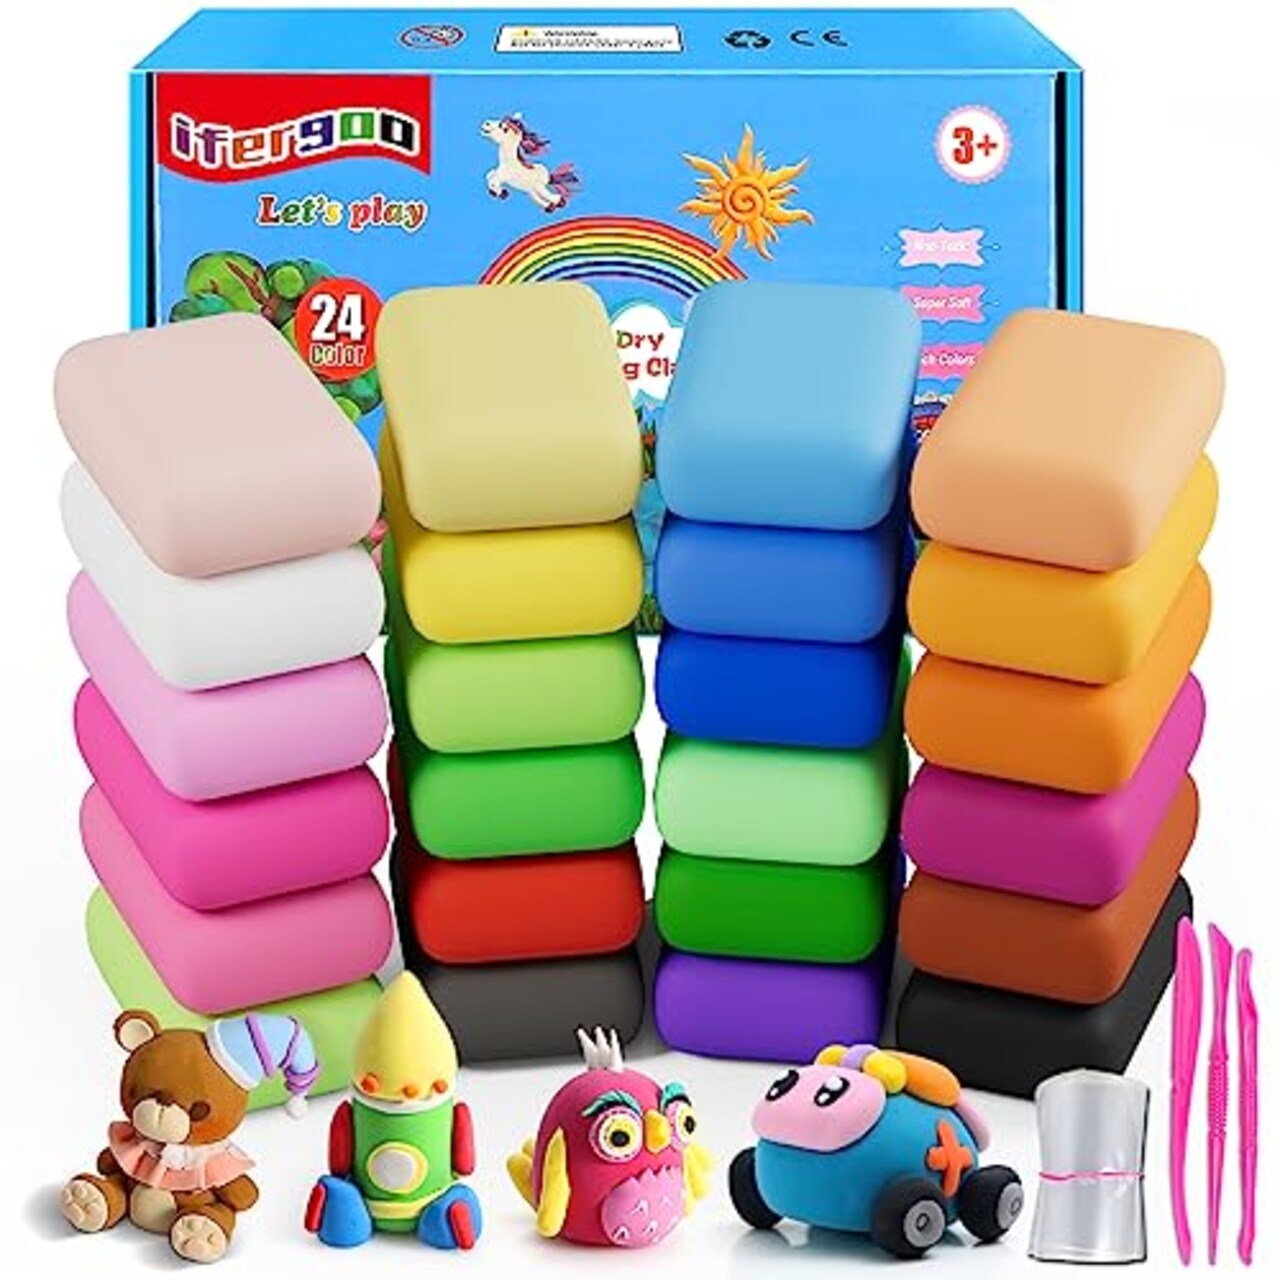 ifergoo Modeling Clay - 24 Colors Air Dry Clay, DIY Magic Clay with Tools and Munuals, Kids Toys Set for Boys and Girls